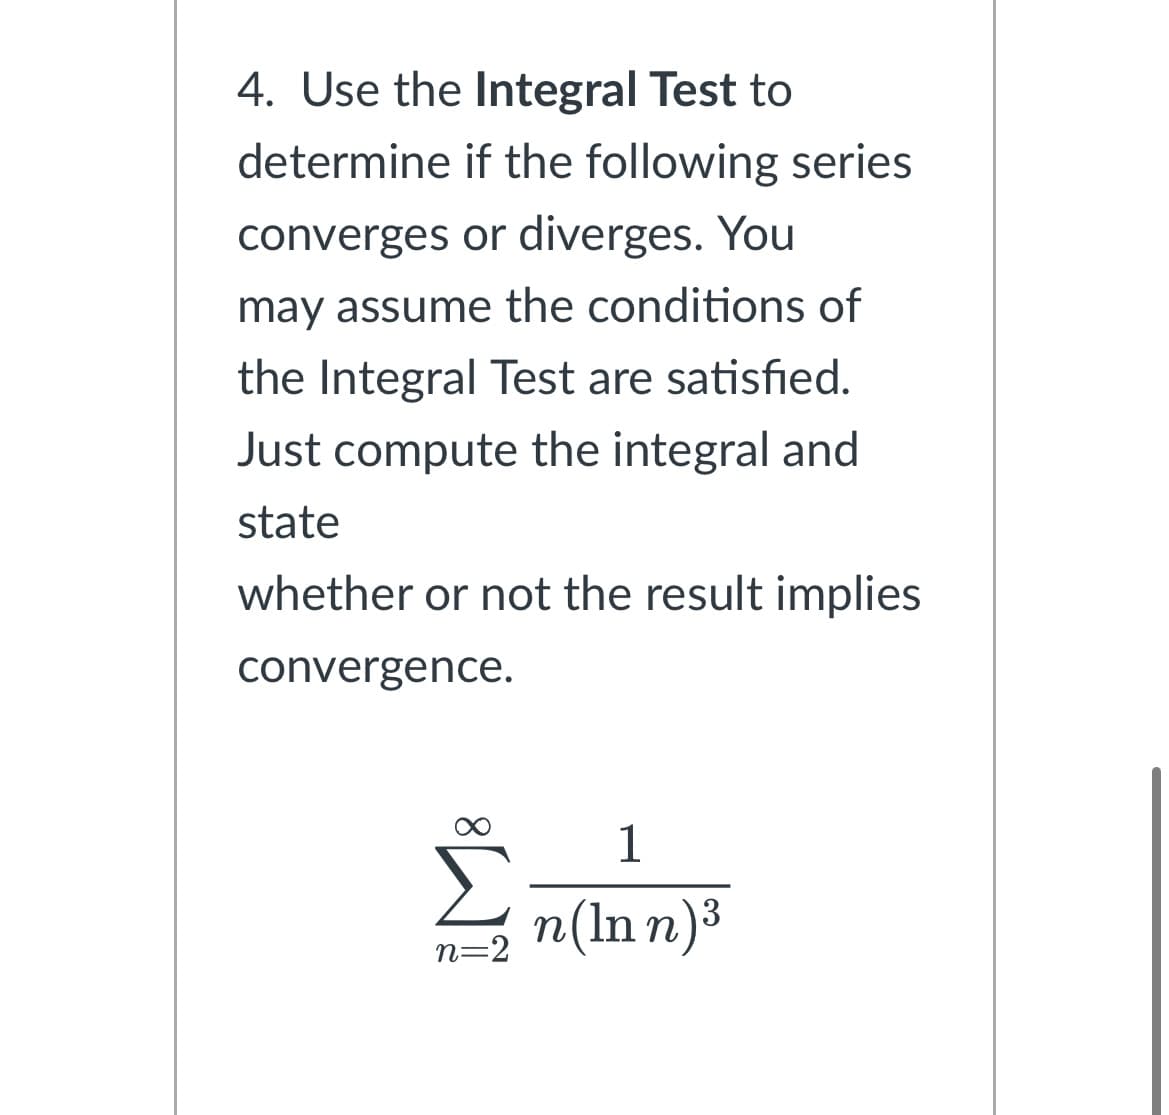 4. Use the Integral Test to
determine if the following series
converges or diverges. You
may assume the conditions of
the Integral Test are satisfied.
Just compute the integral and
state
whether or not the result implies
convergence.
ง
n=2
1
n(ln n)³